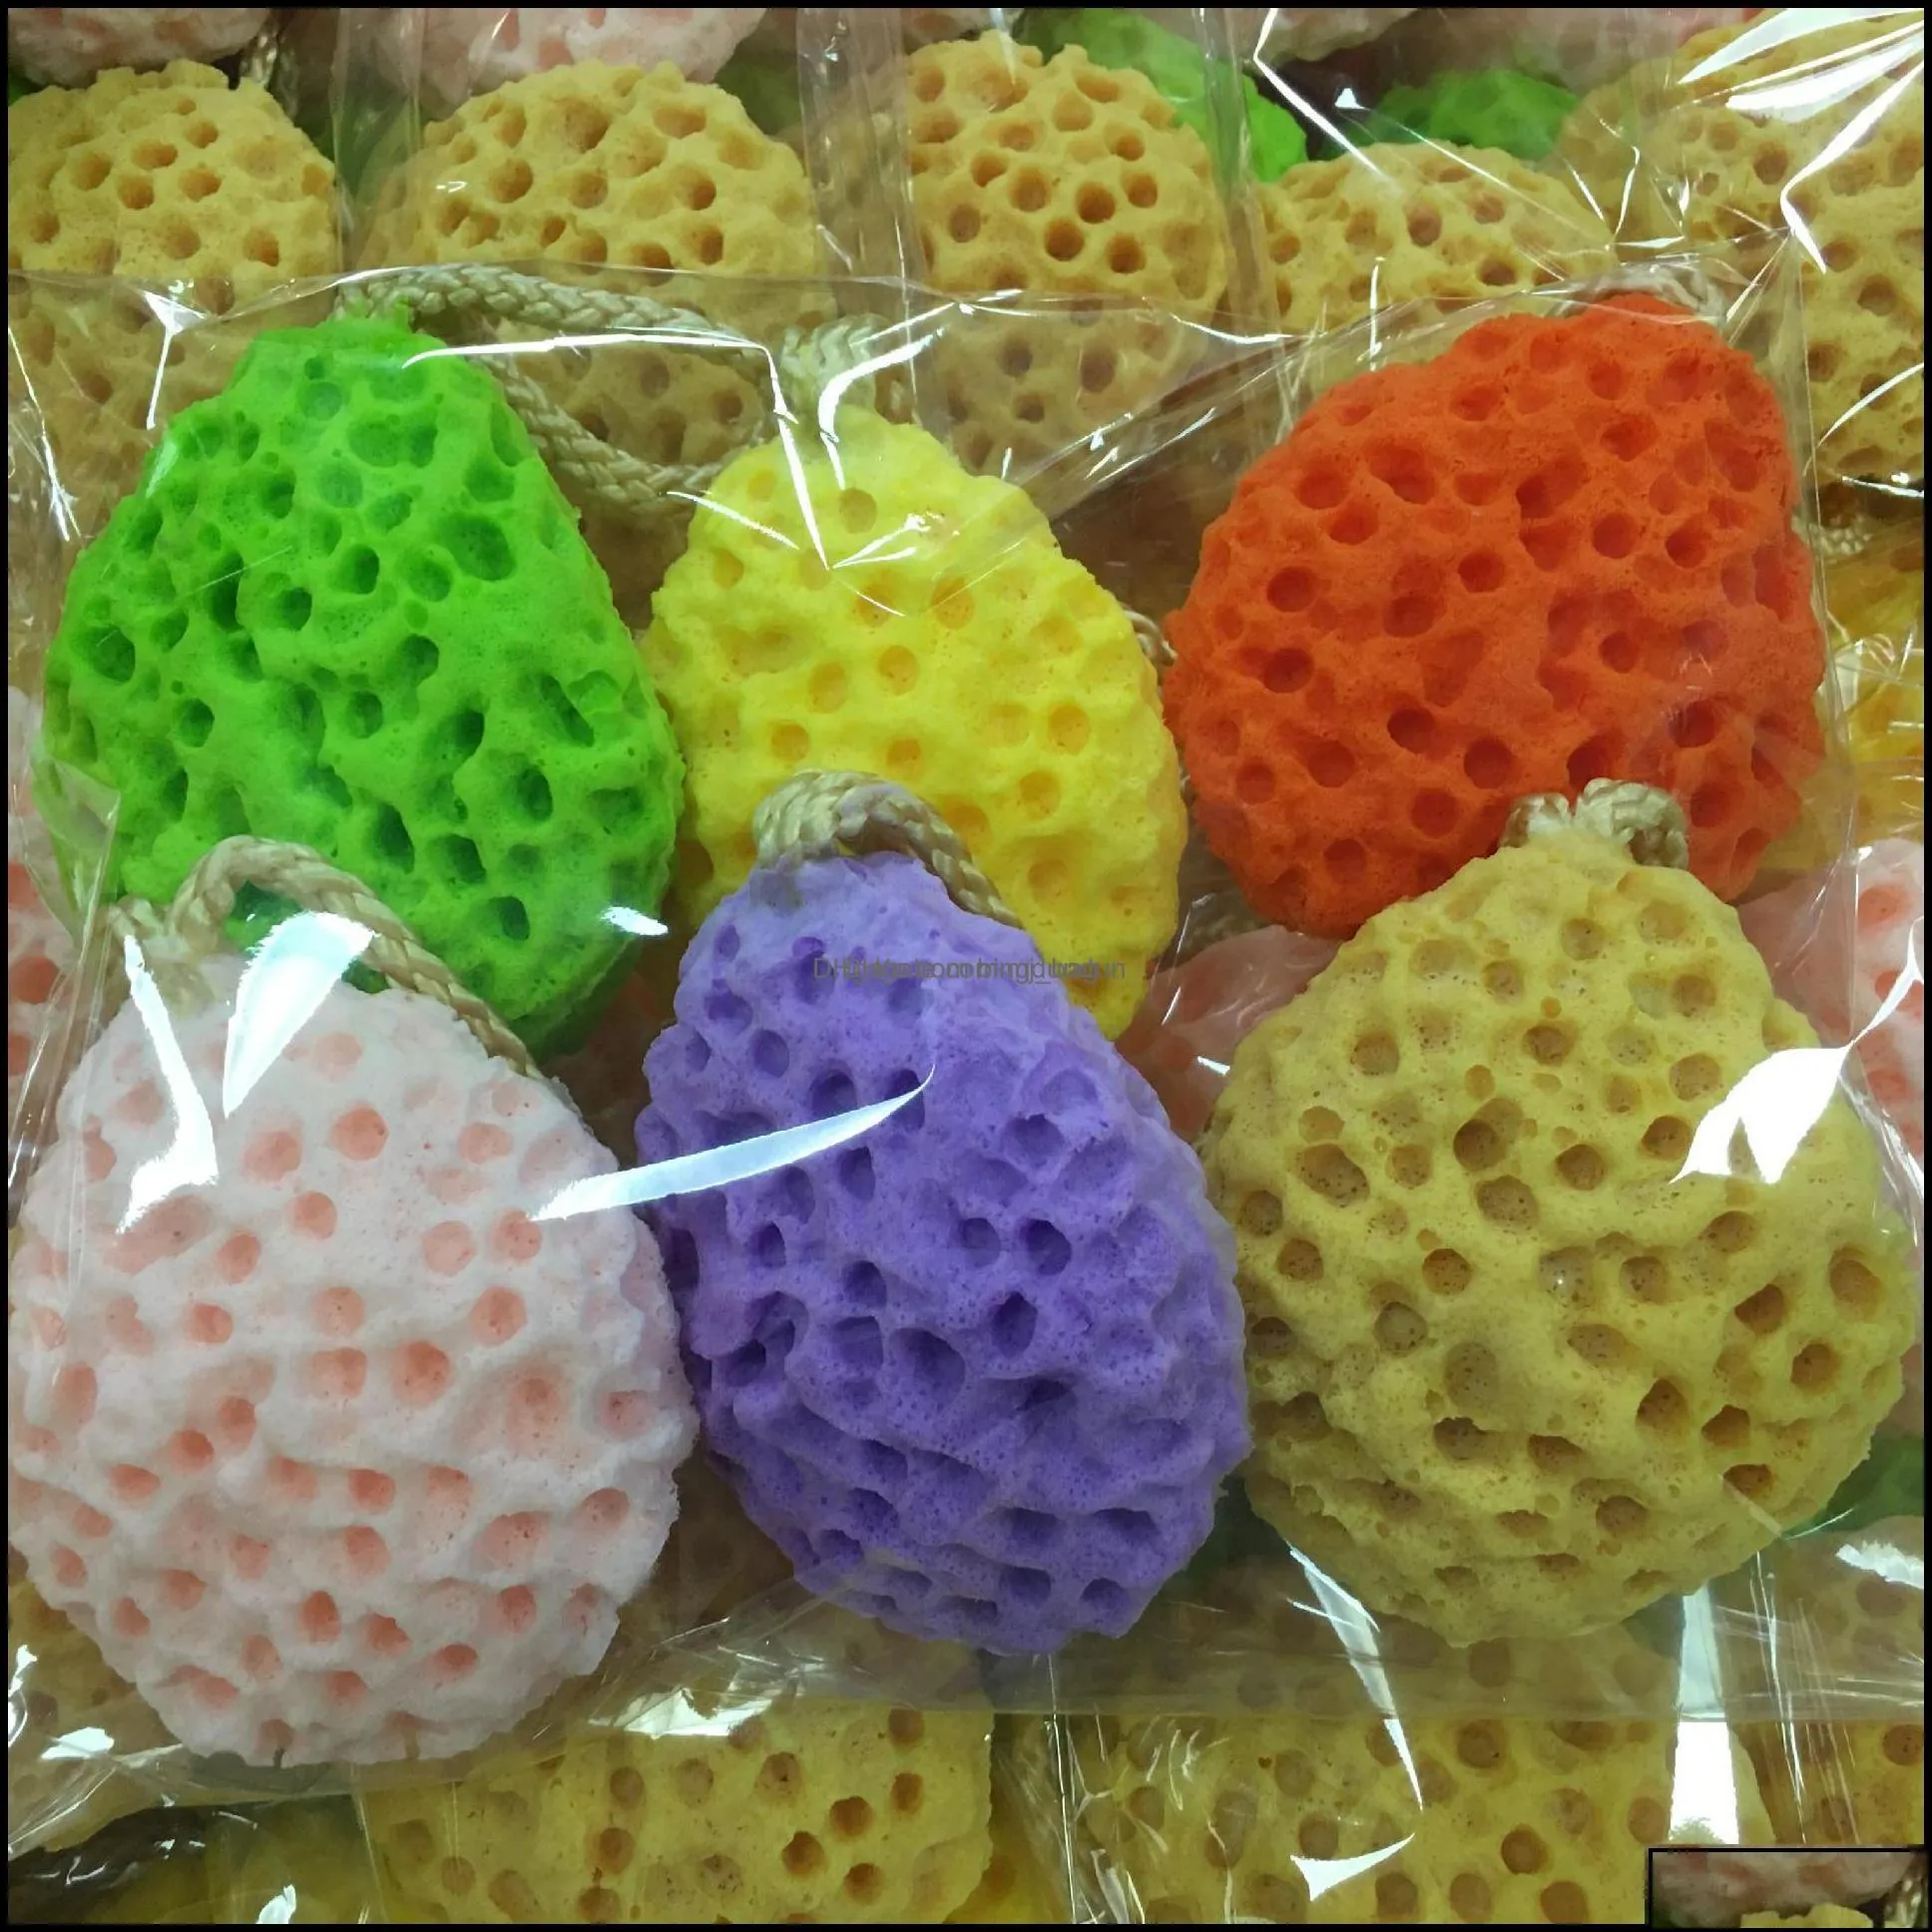 bath brushes sponges scrubbers bathroom accessories home garden with rope ball soft skin soaking water becomes larger honeycomb